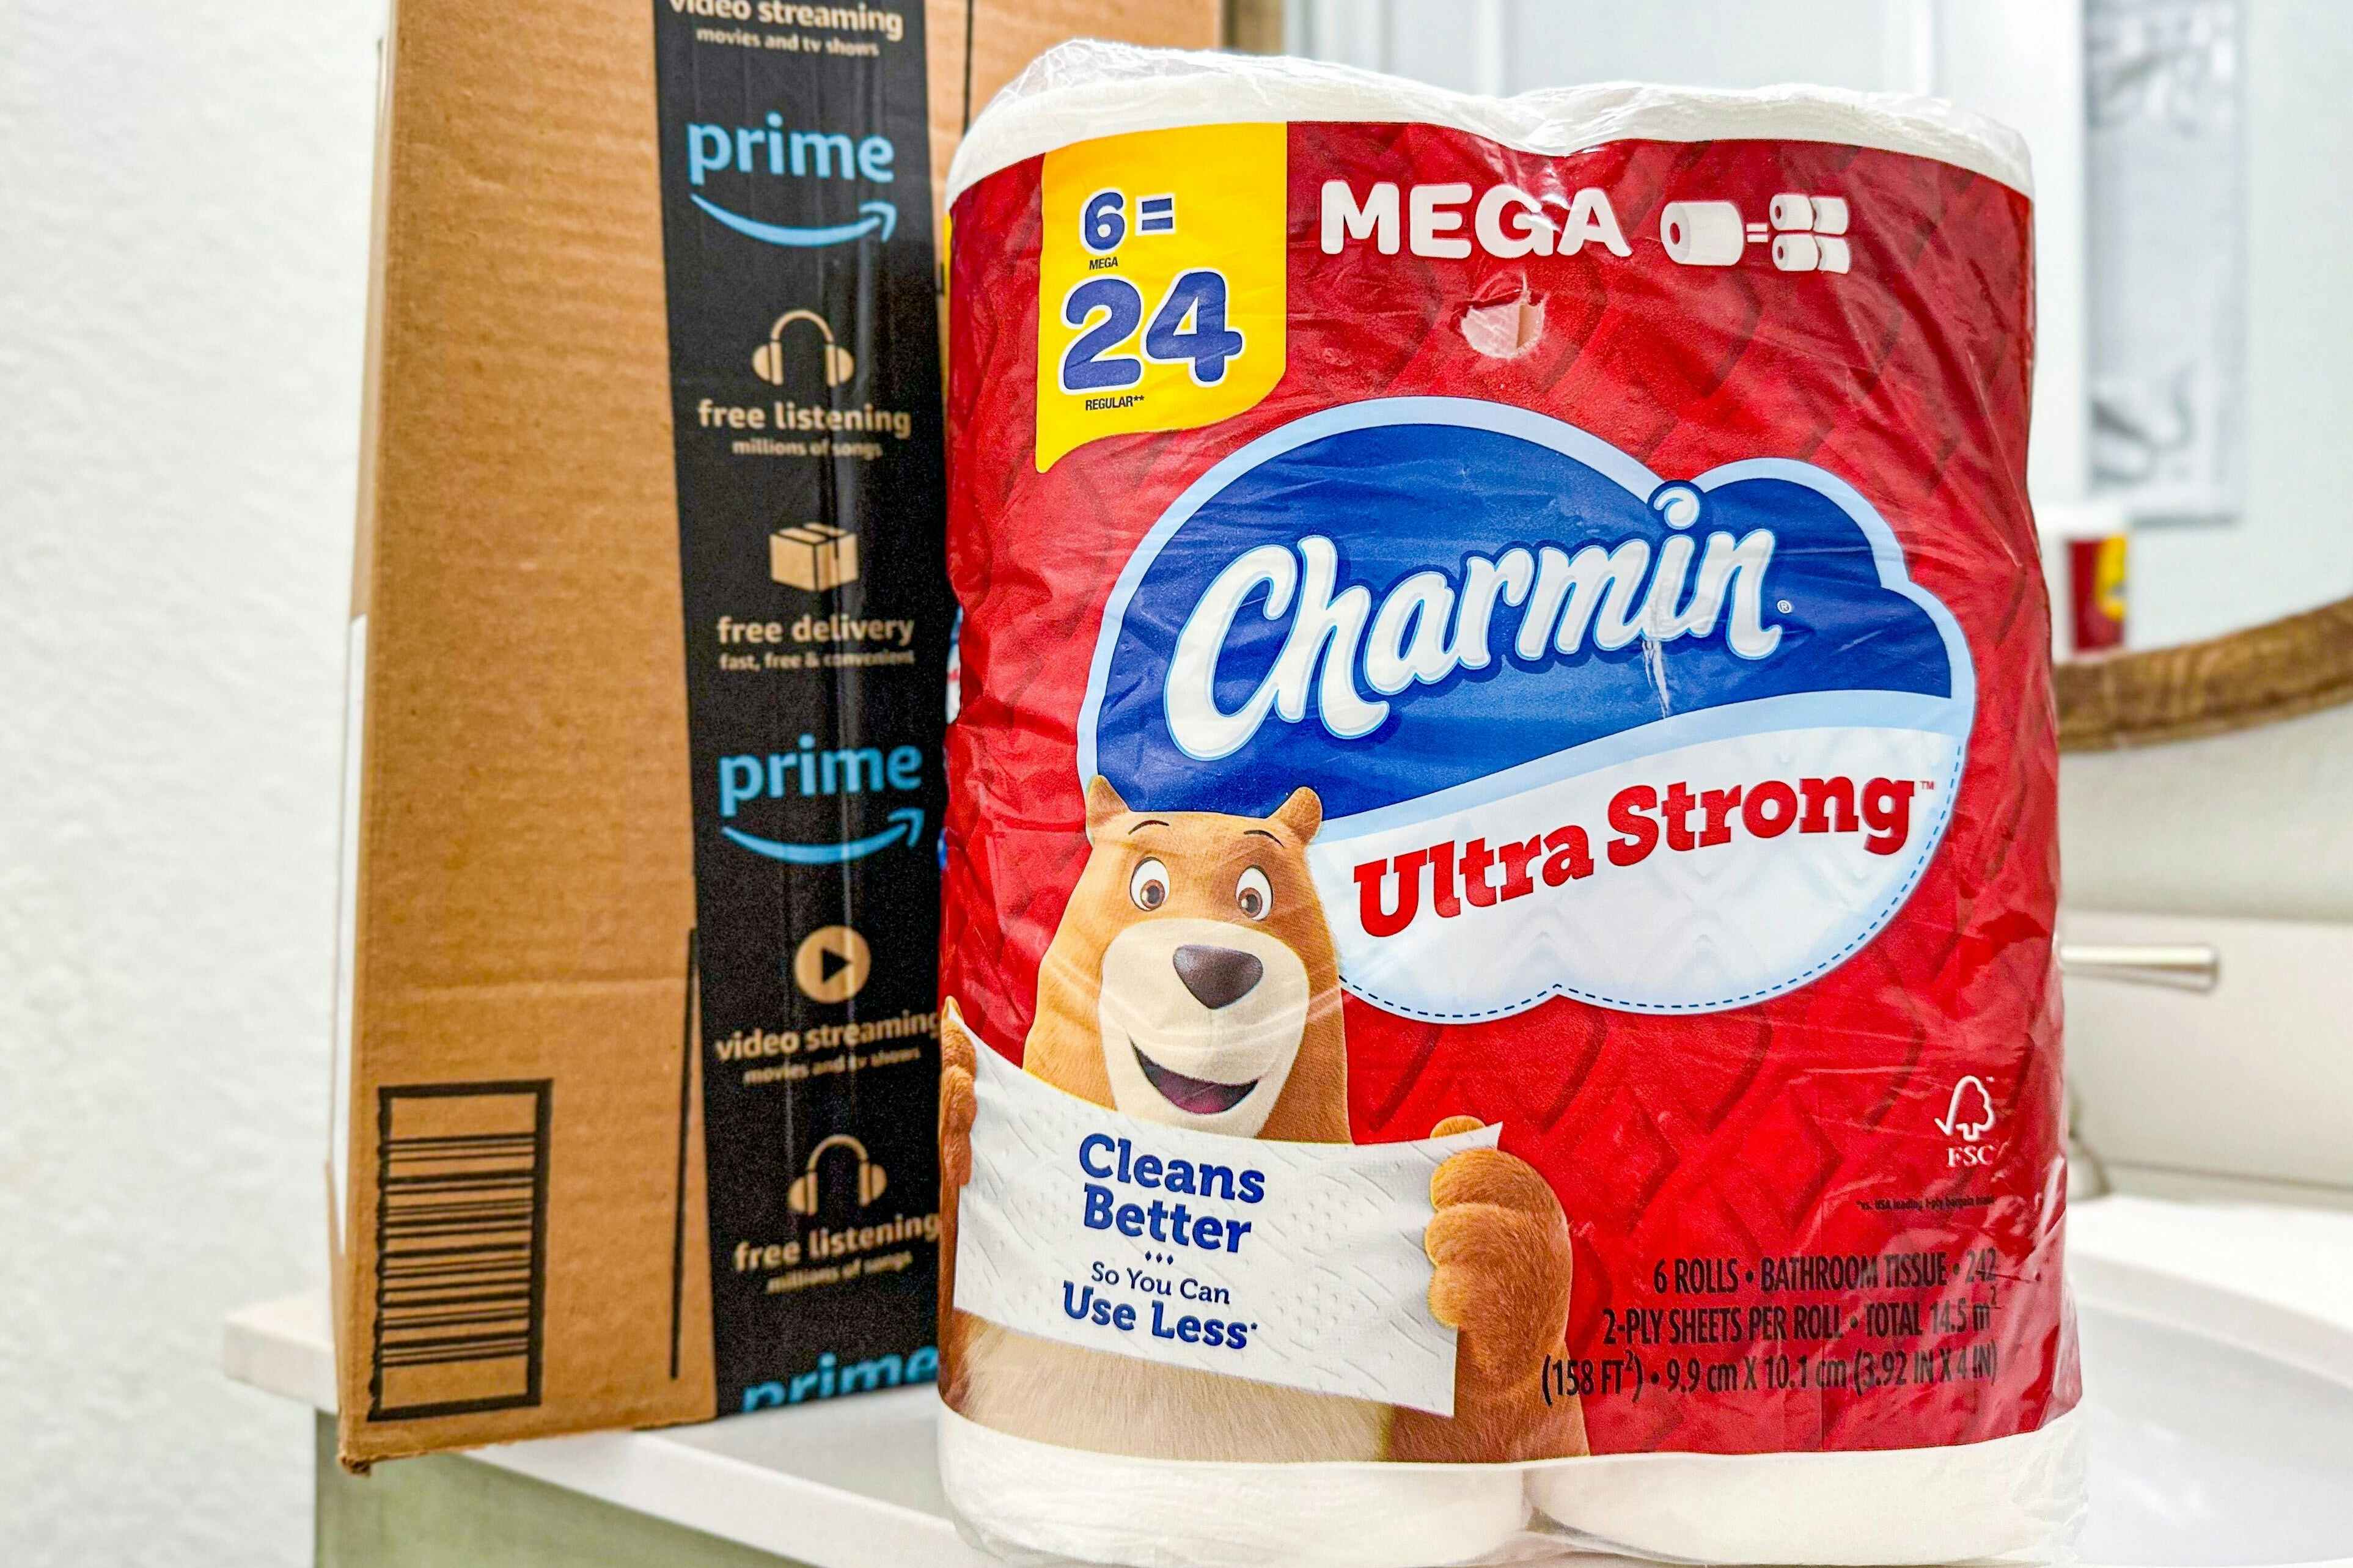 Charmin Ultra Strong Toilet Paper: Buy 3 and Get $10 Amazon Credit